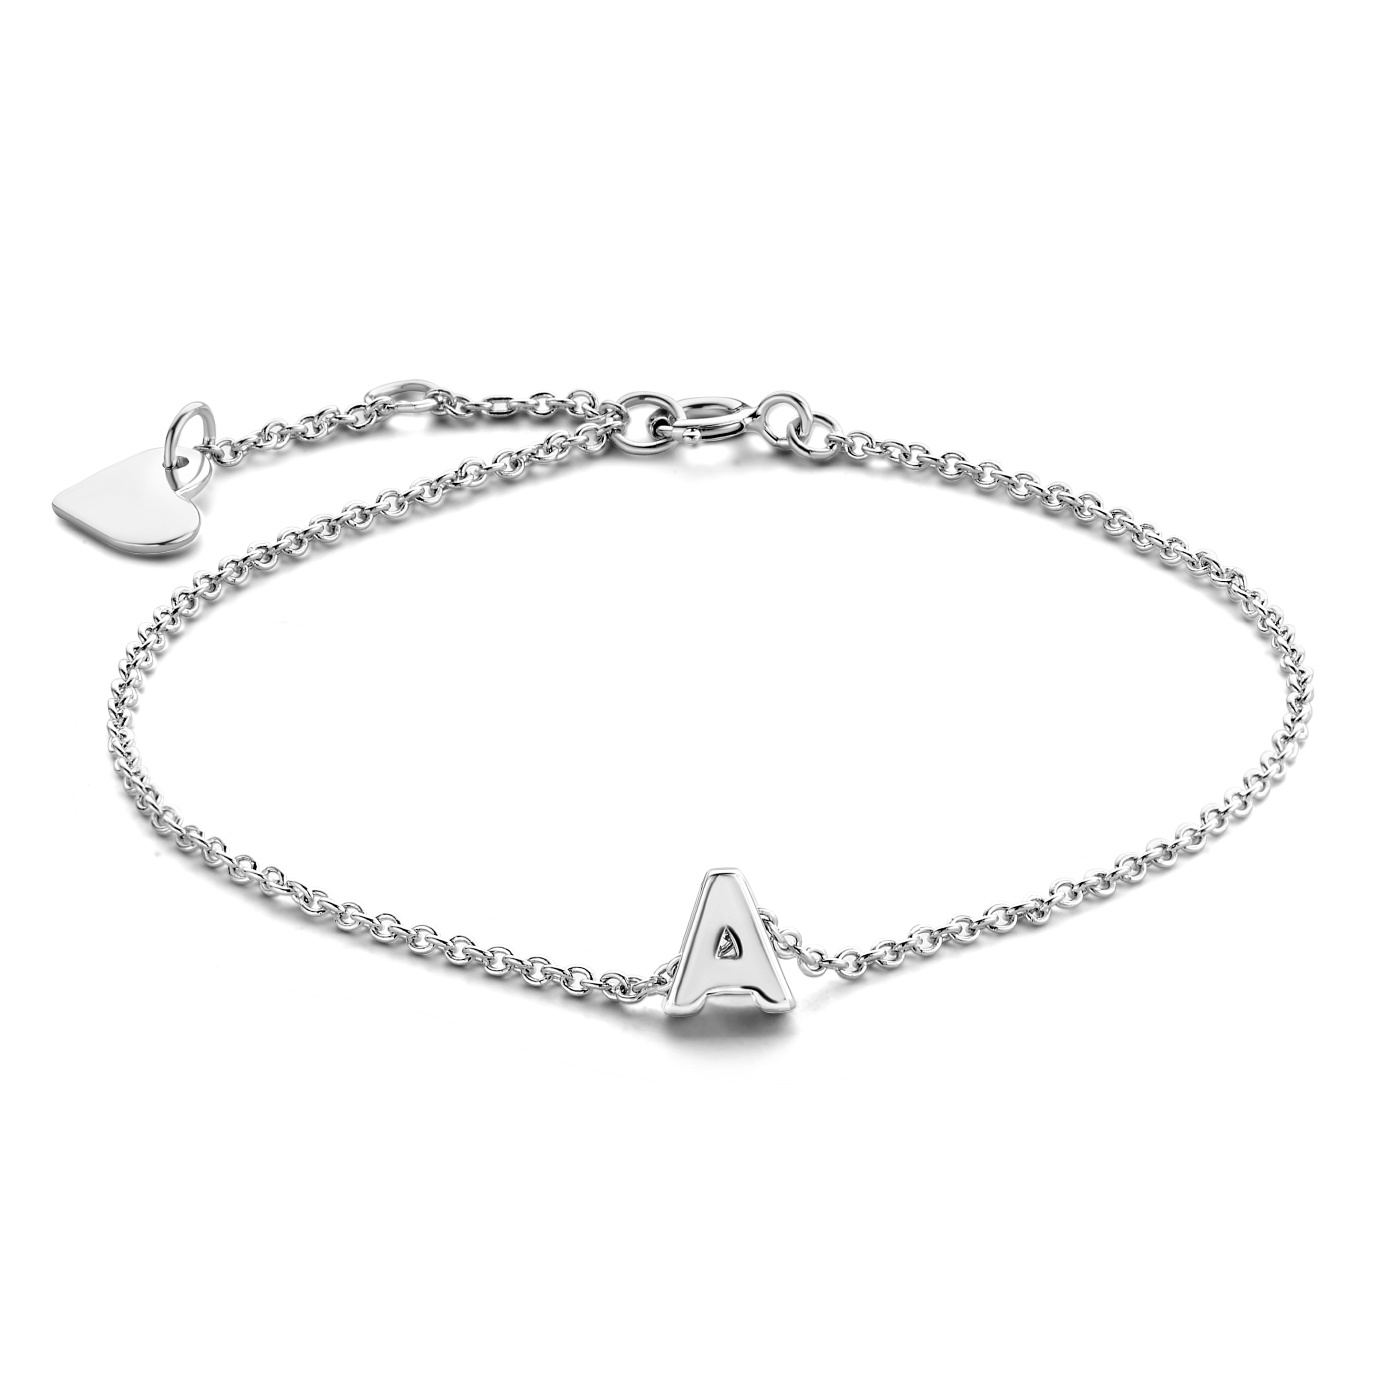 Céleste Selected Julie Armband 925 Sterling Silber Initiale Jewels